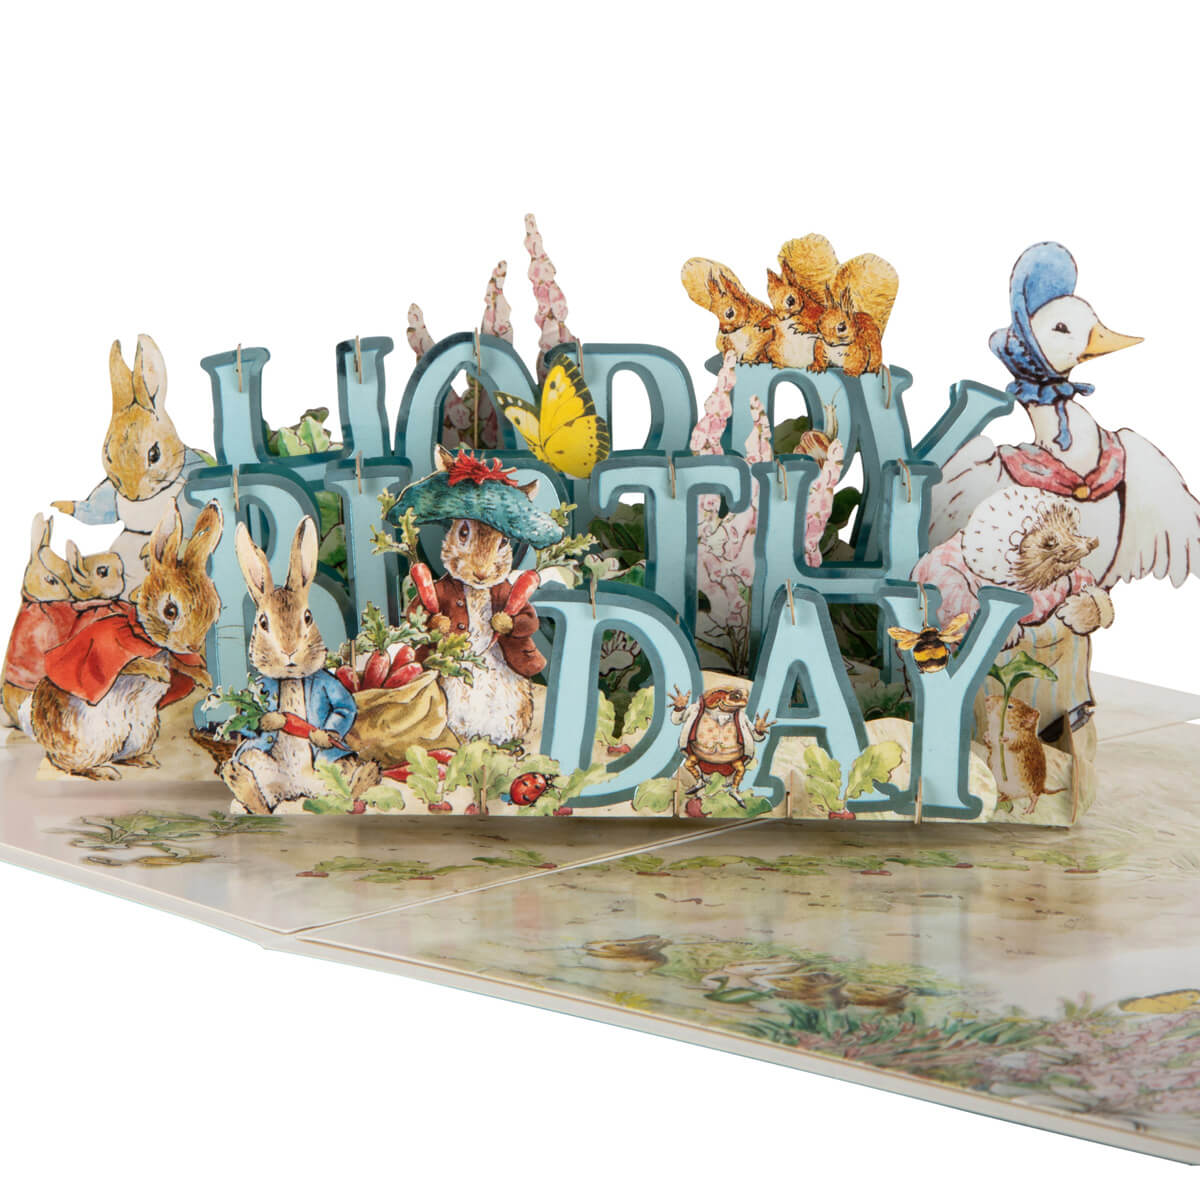 Peter Rabbit Birthday Pop Up Card Close Up Image - big Hoppy Birthday sign in Mr.McGregors garden surrounded by all characters from the iconic Beatrix Potter tale.